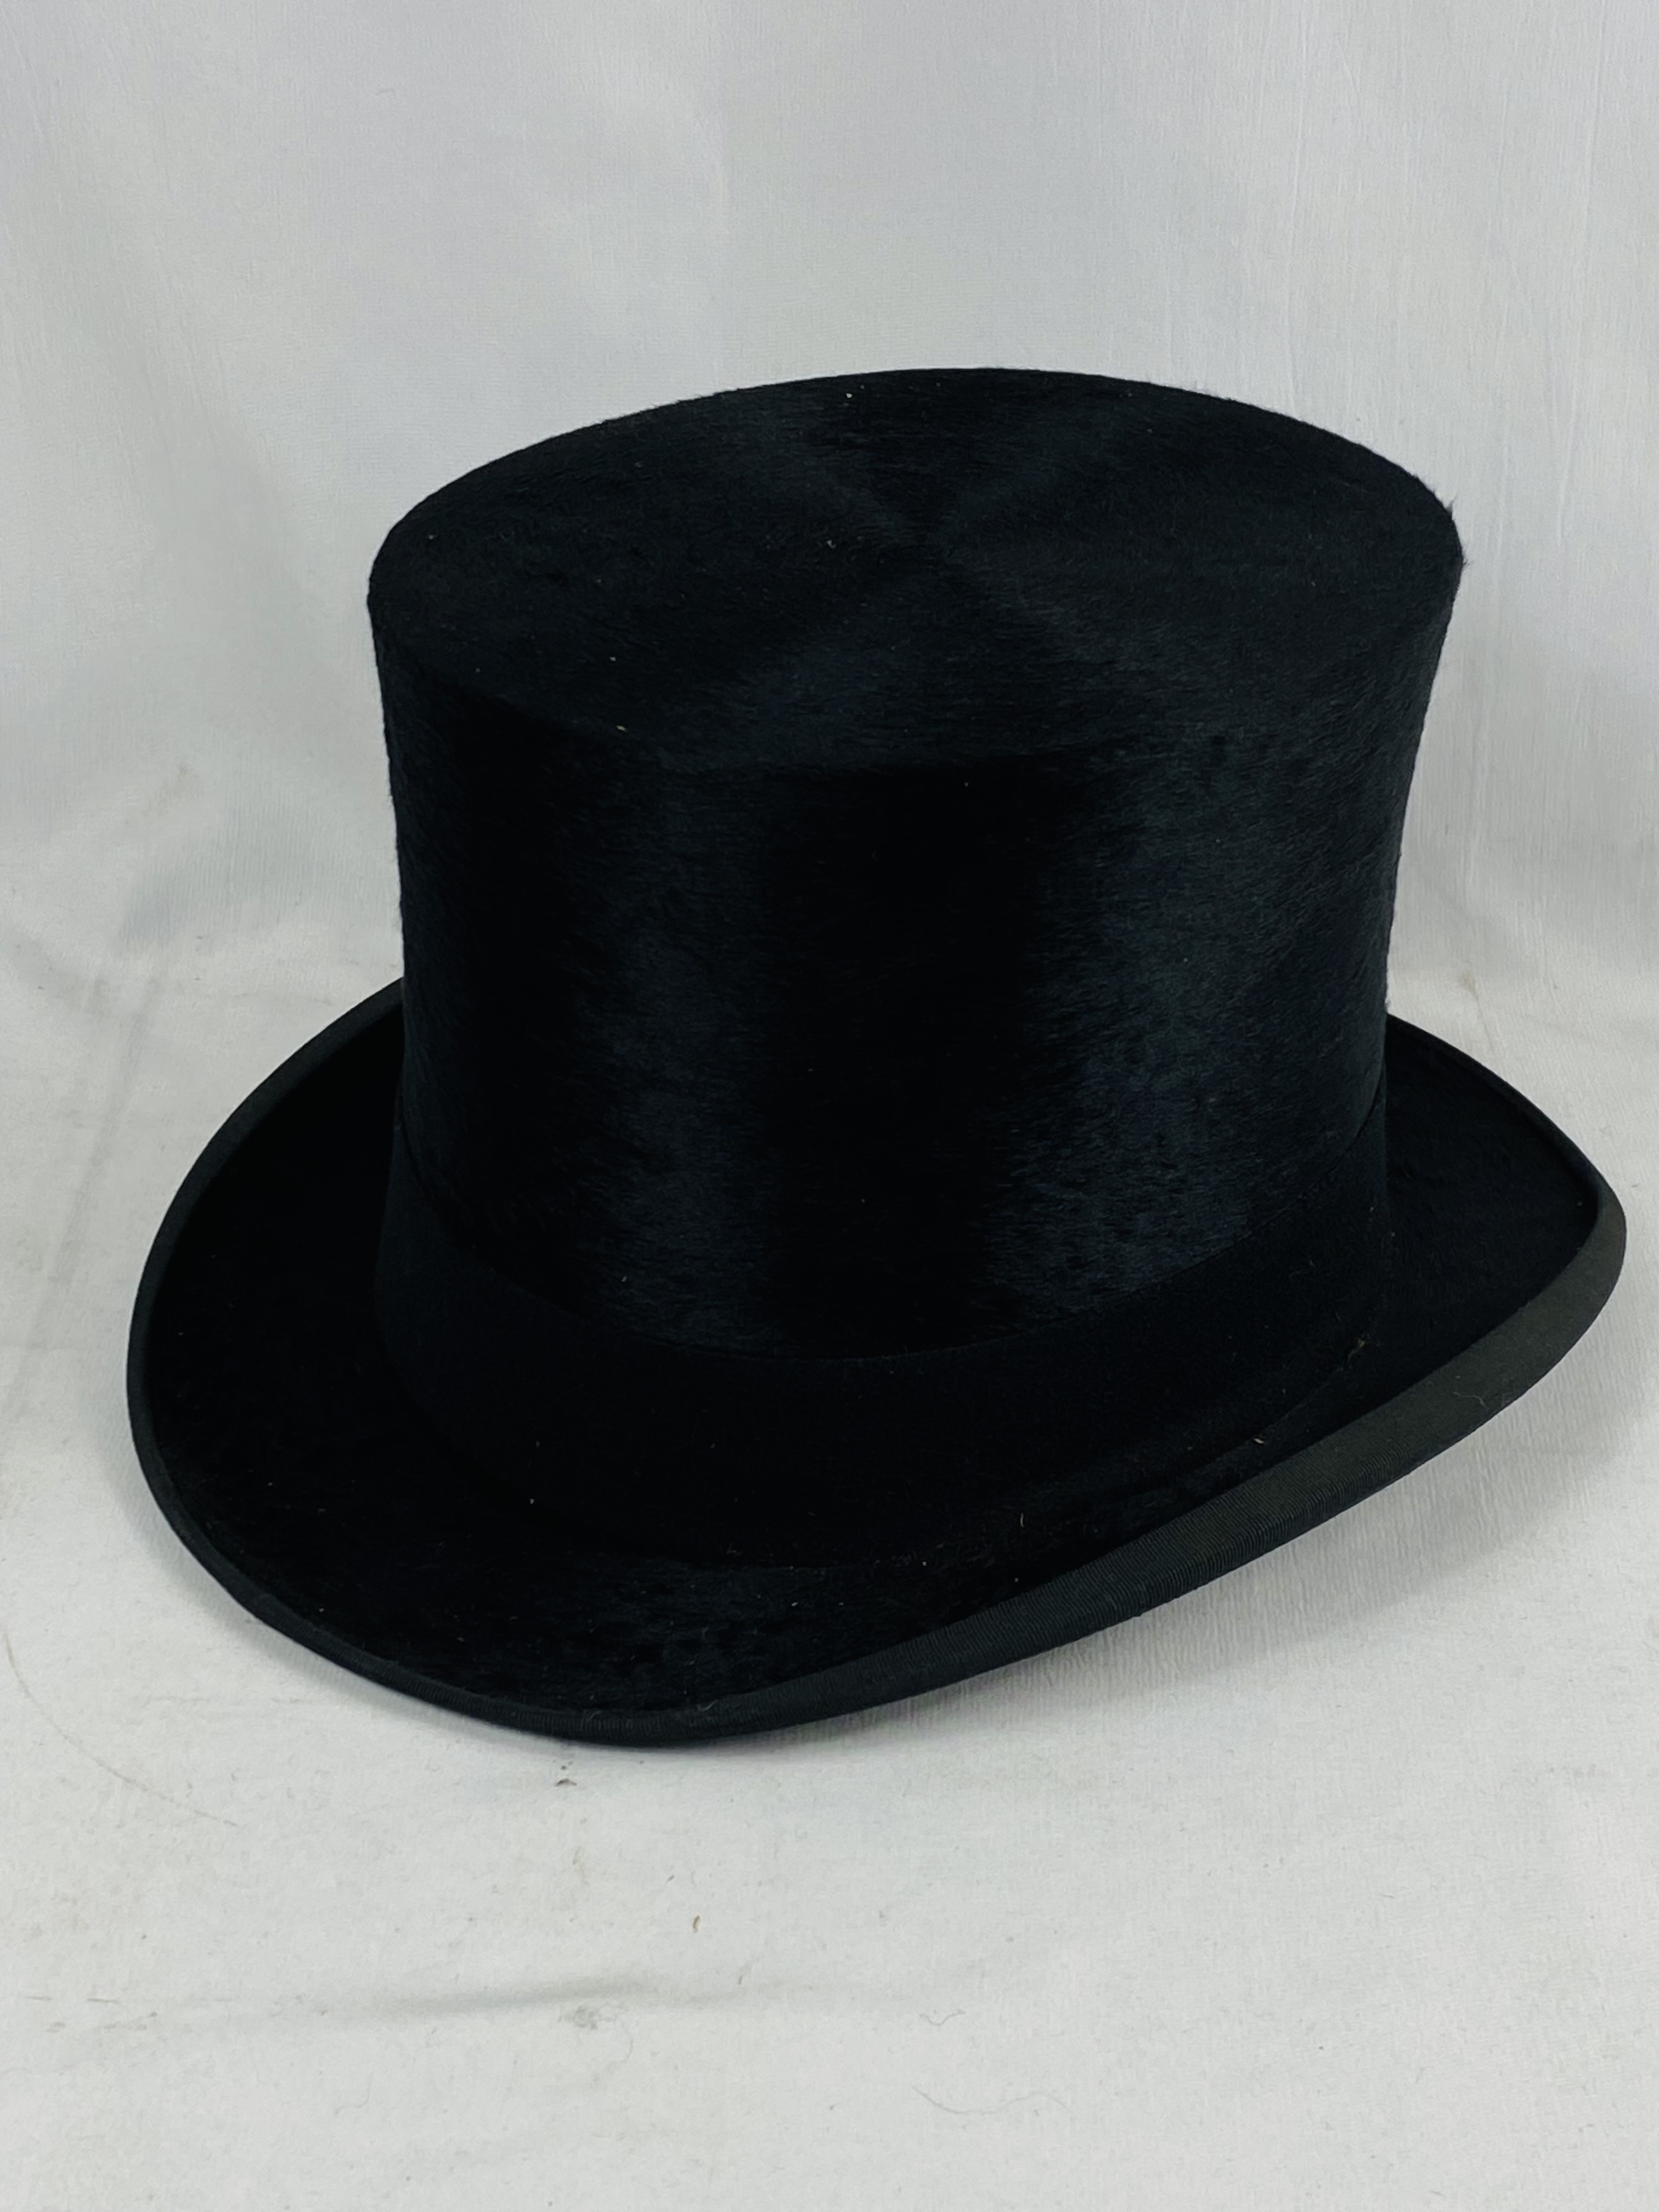 Dunn & Co childs silk top hat - Image 4 of 7